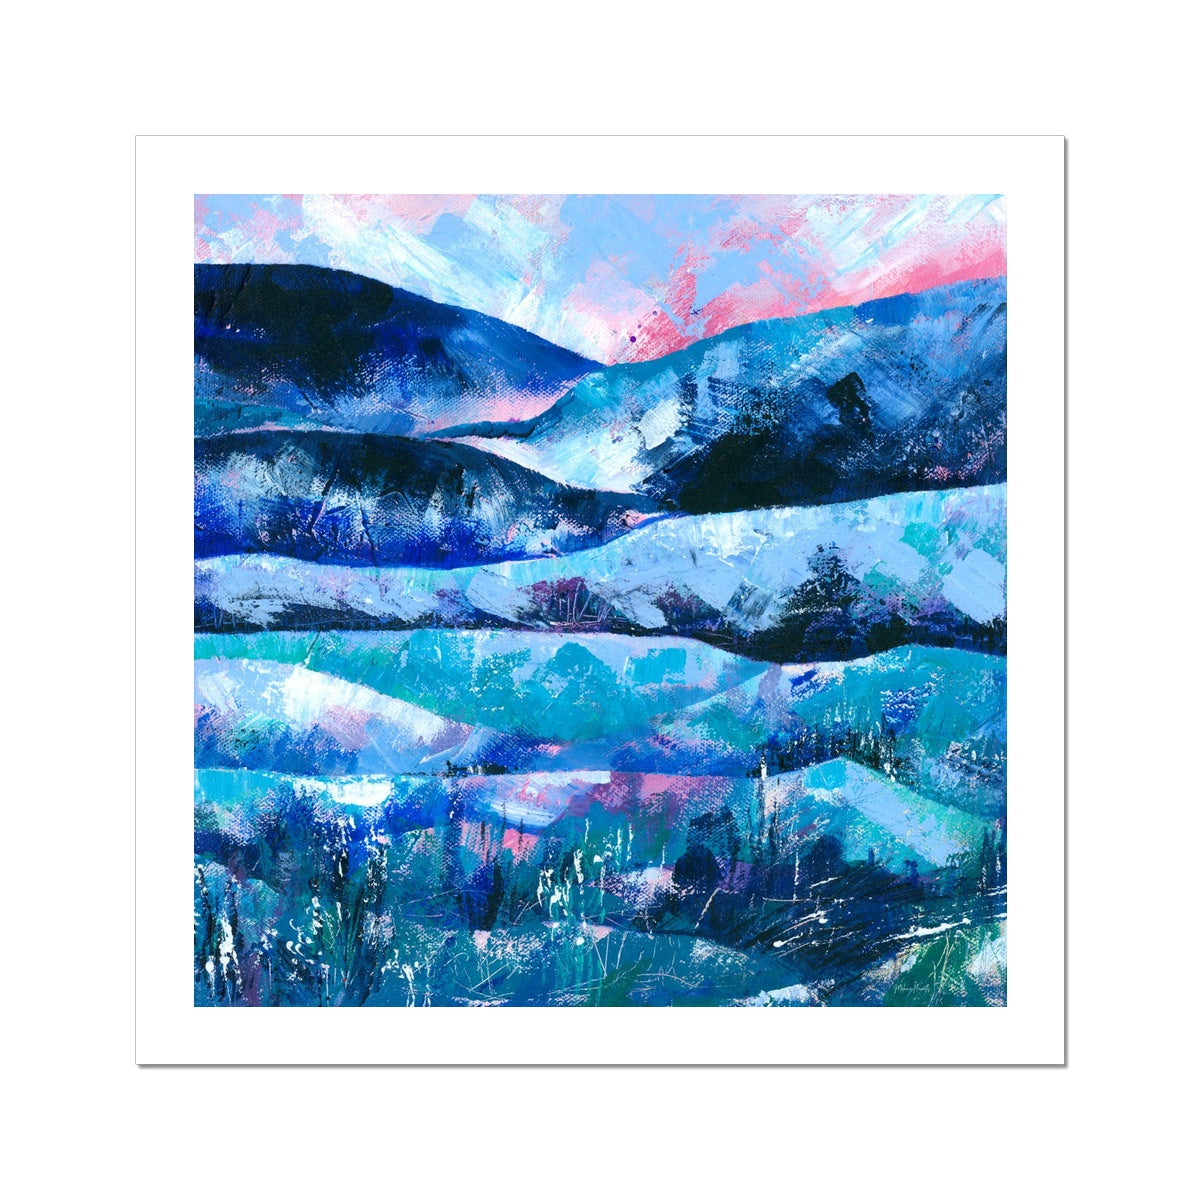 Tranquility abstract landscape painting art print shown with a white border around it.